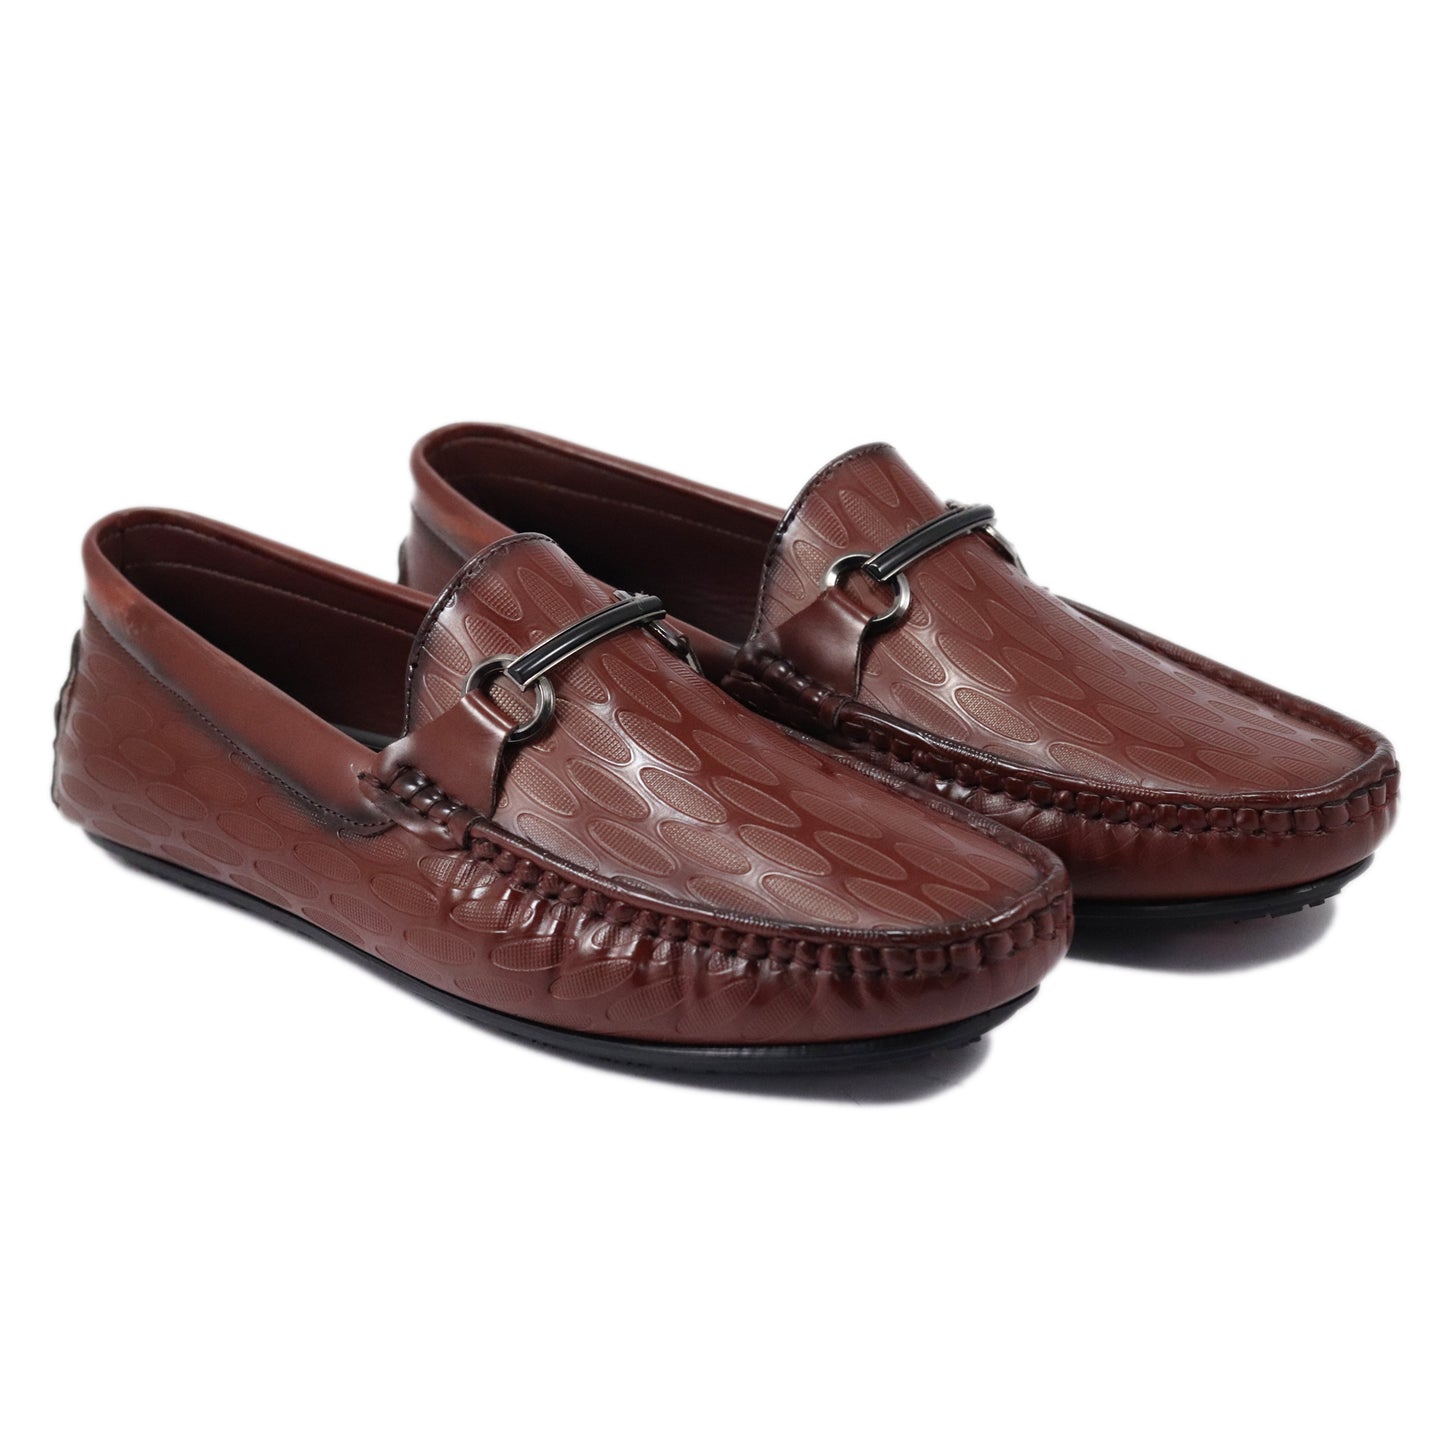 Men's Stylish Latest Casual Loafers